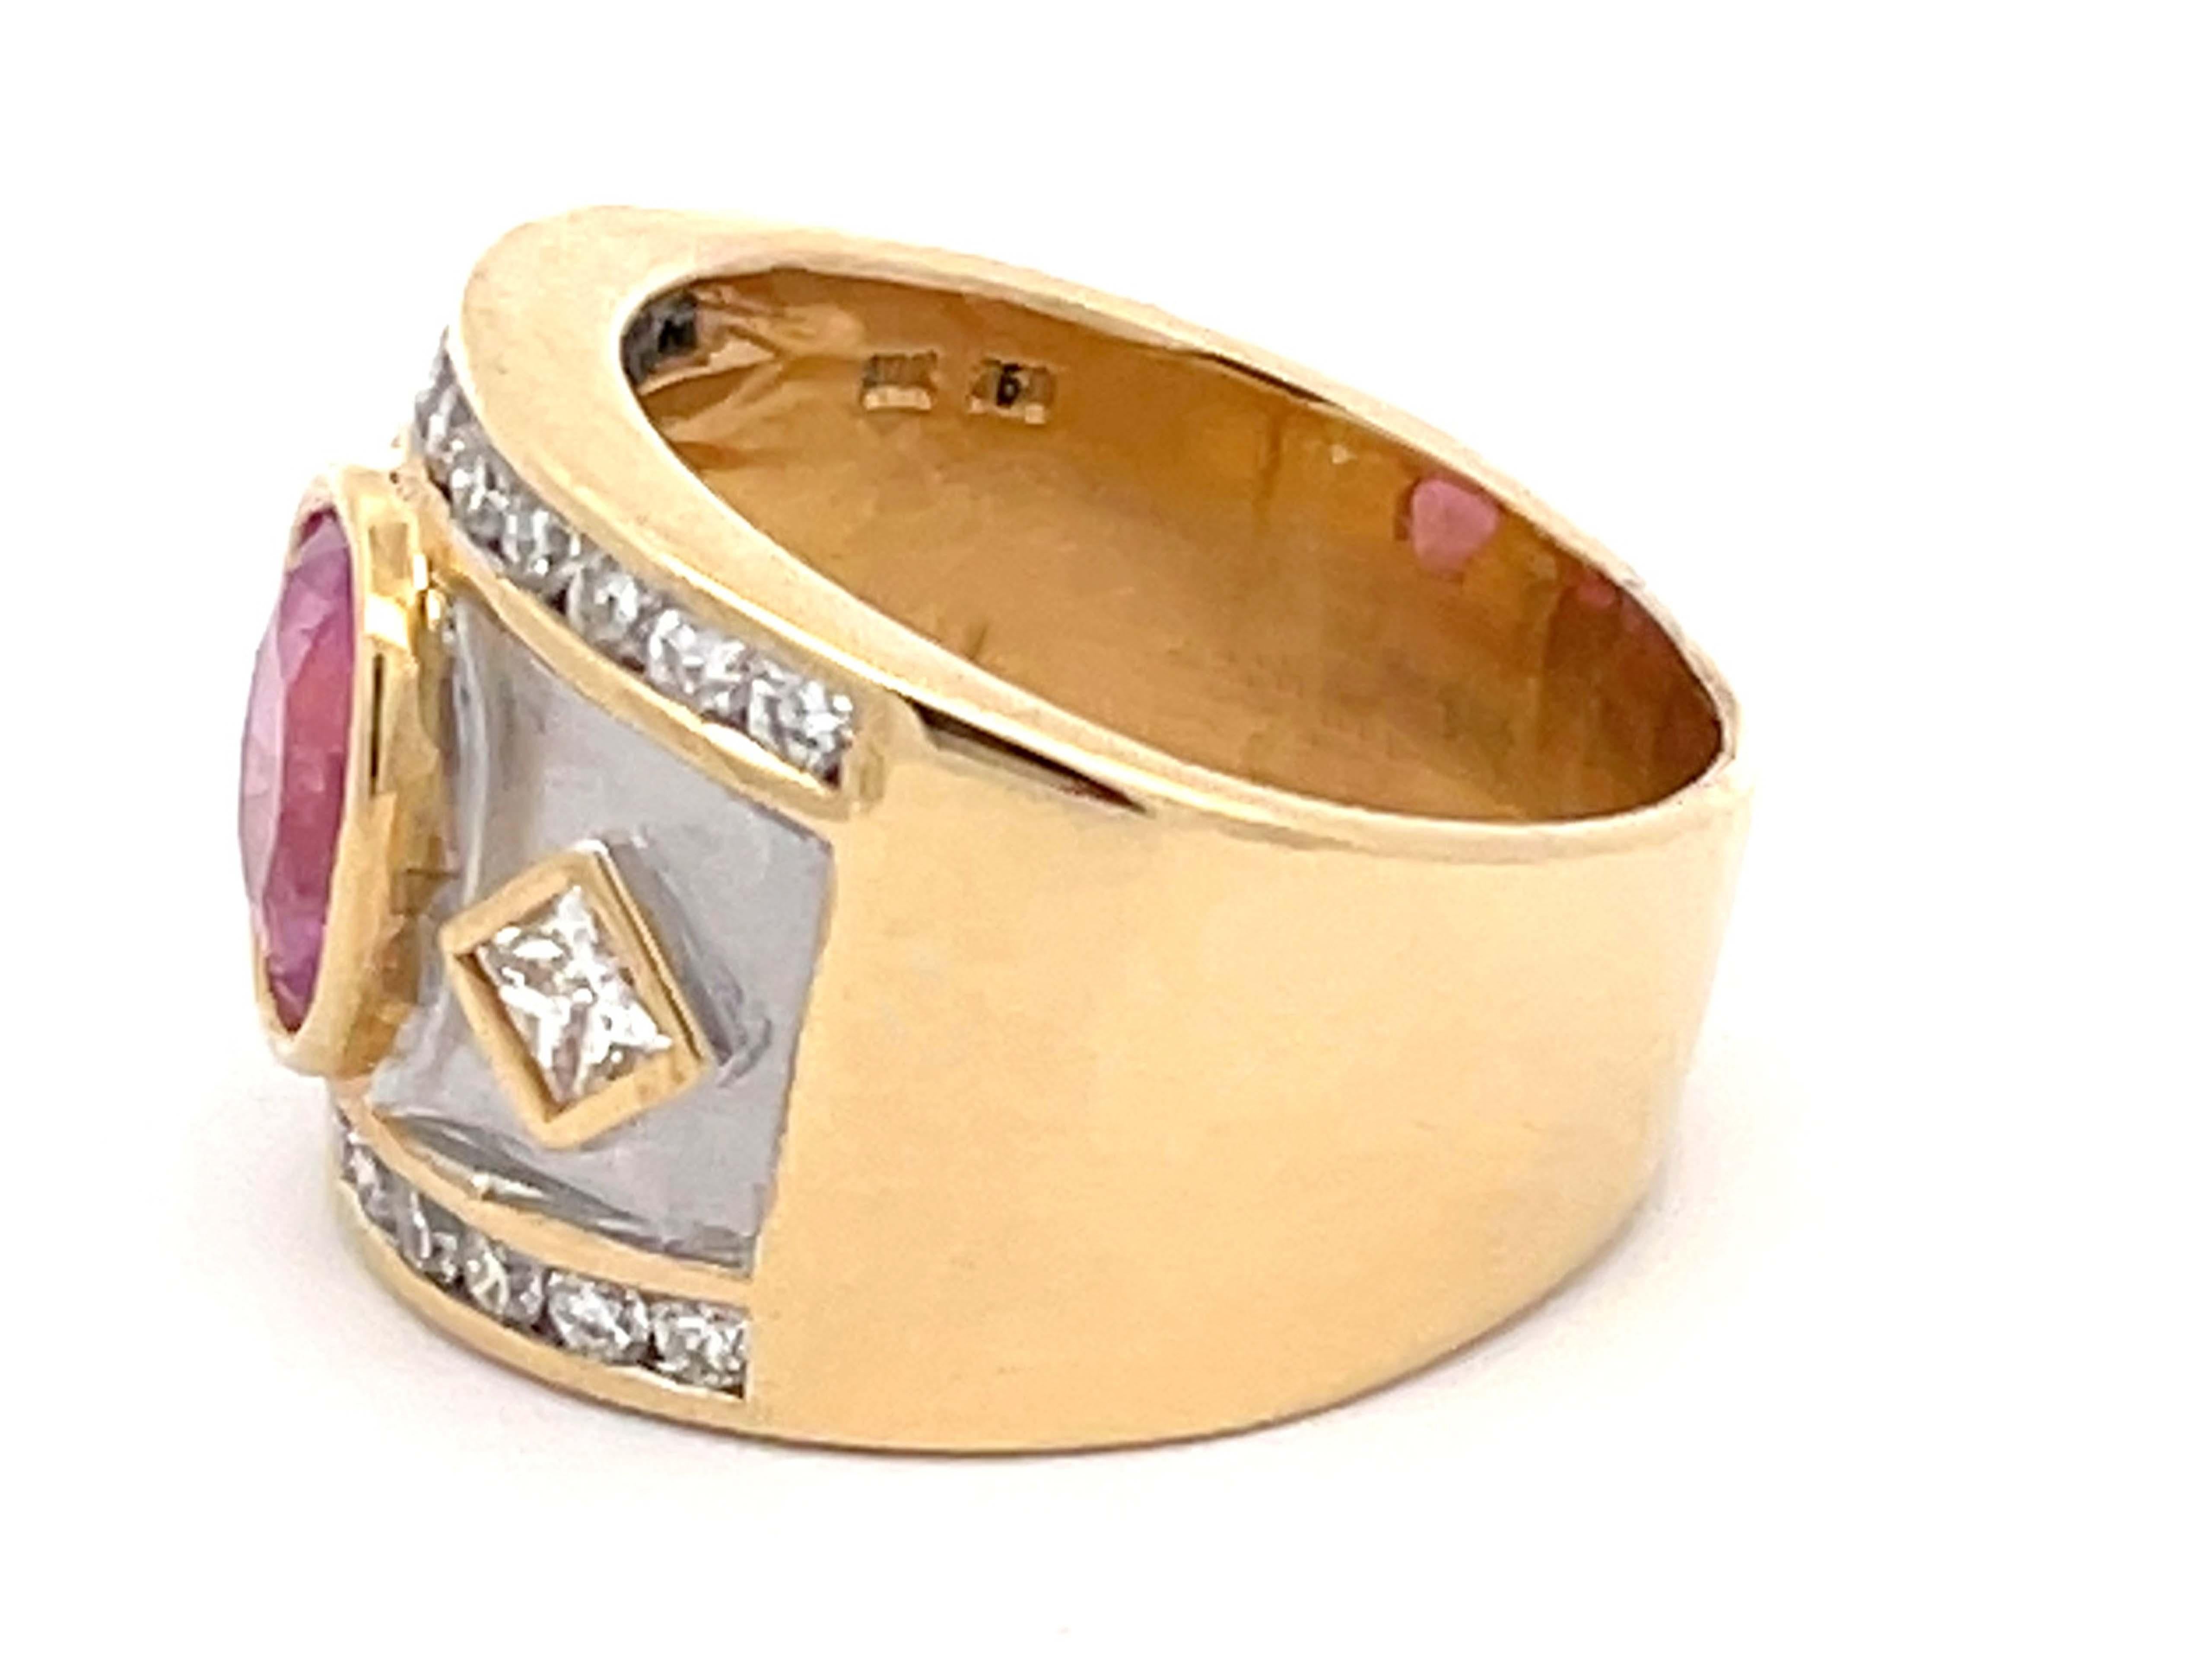 Brilliant Cut Pink Tourmaline and Diamond Cigar Band Ring in 18K Yellow Gold For Sale